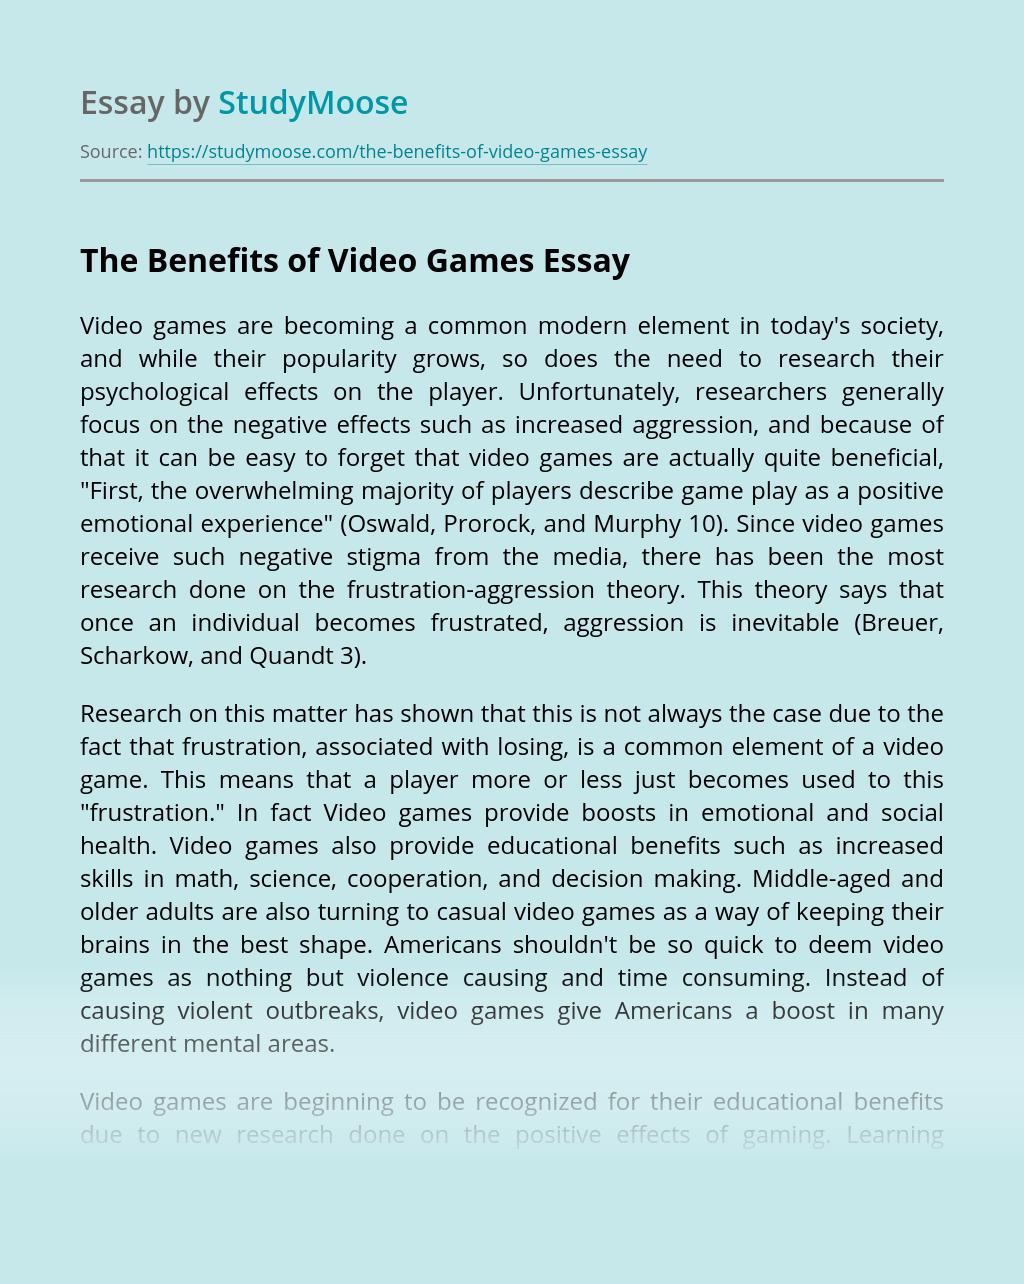 Positive Effect of Video Games | Free Essay Example